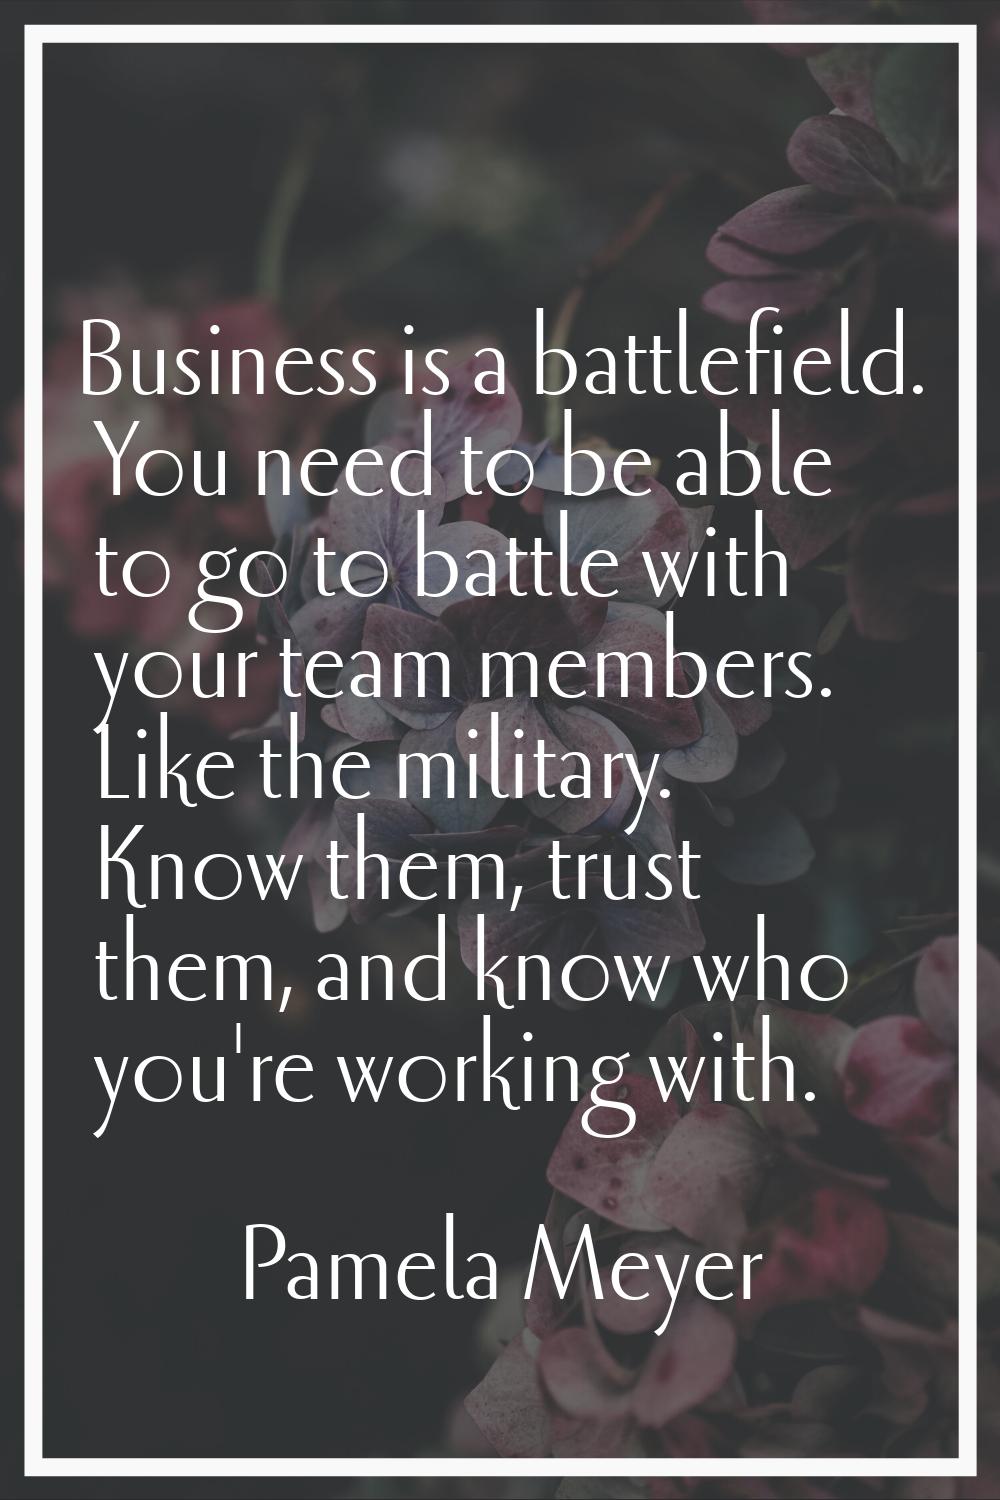 Business is a battlefield. You need to be able to go to battle with your team members. Like the mil